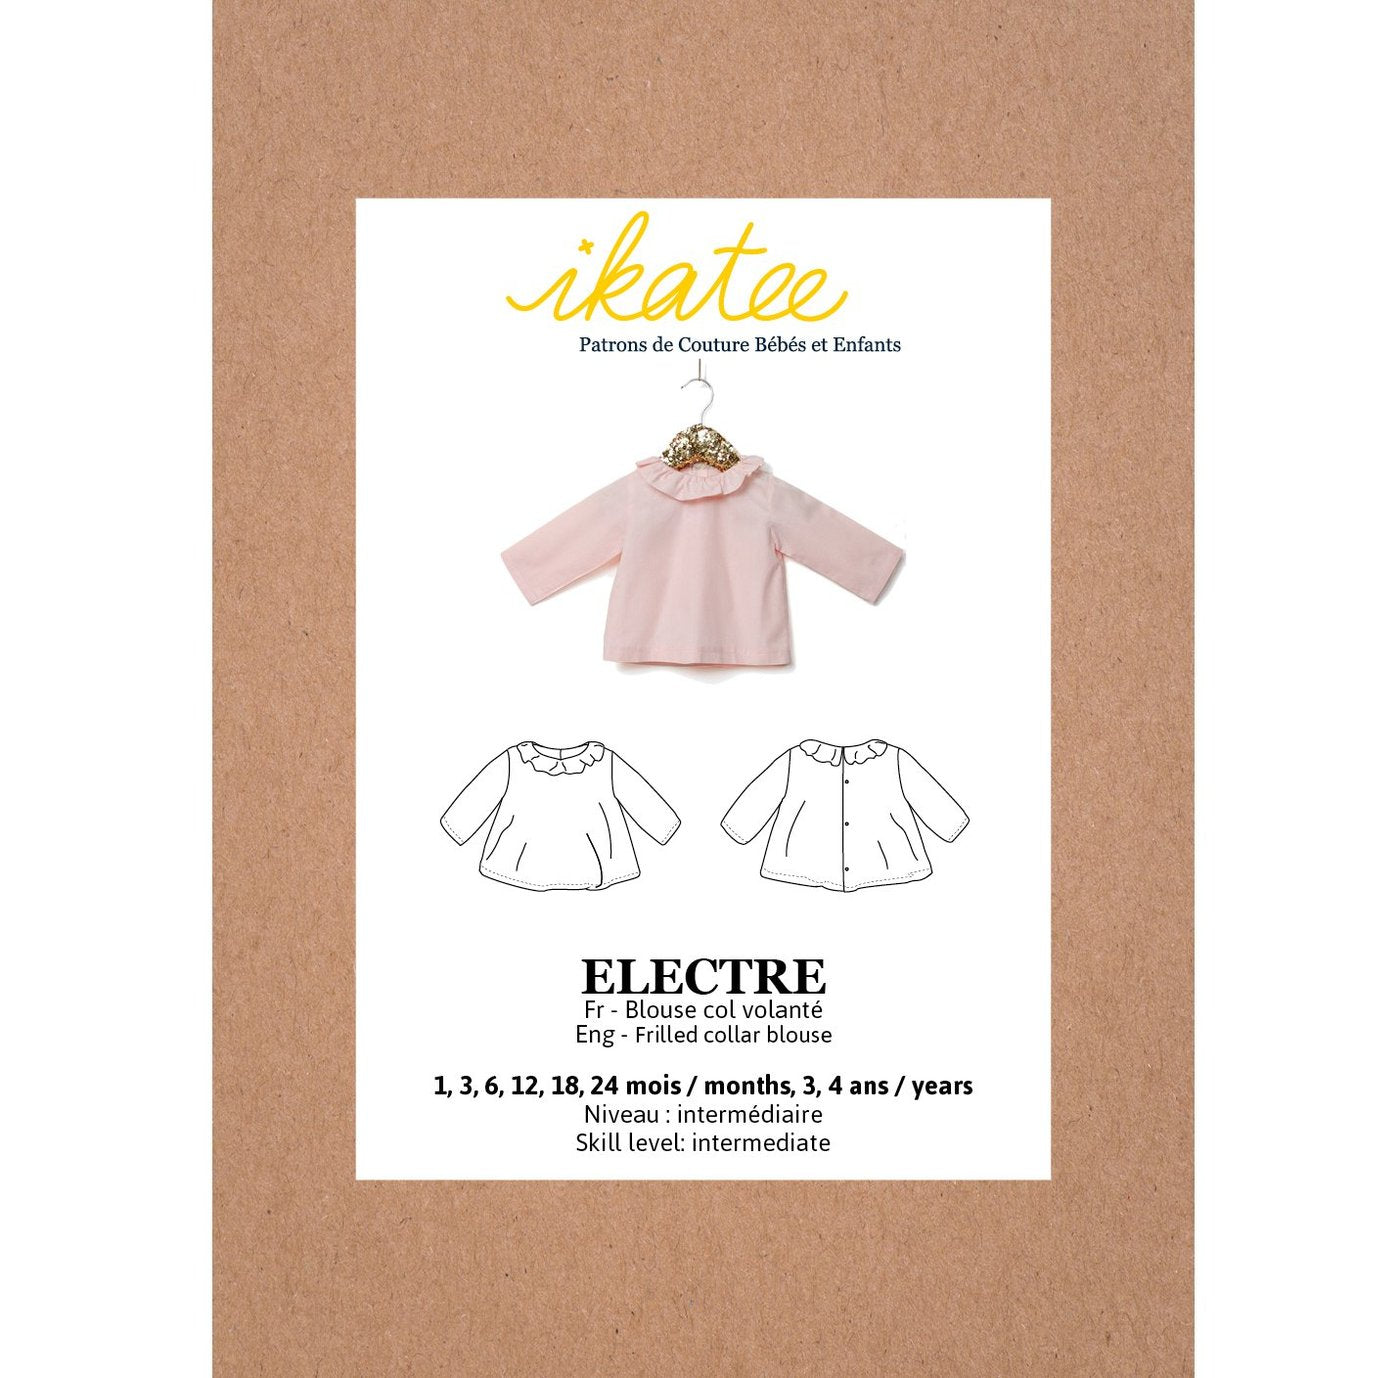 Ikatee - ELECTRE frilled collar Blouse - Baby 1M-4Y - Paper Sewing Pattern